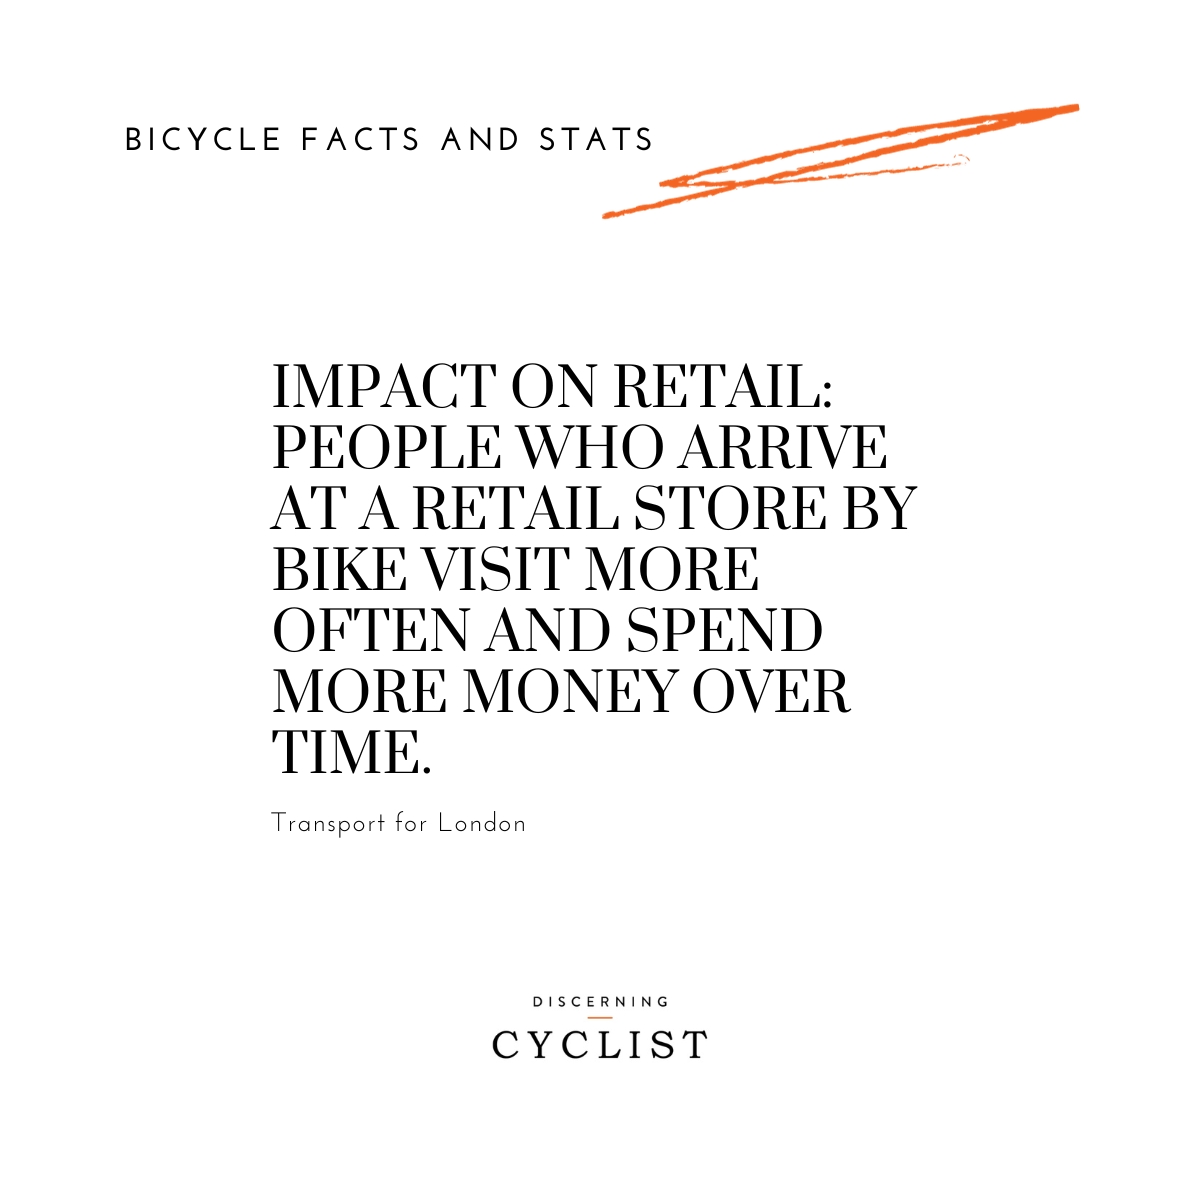 Impact on Retail: People who arrive at a retail store by bike visit more often and spend more money over time.